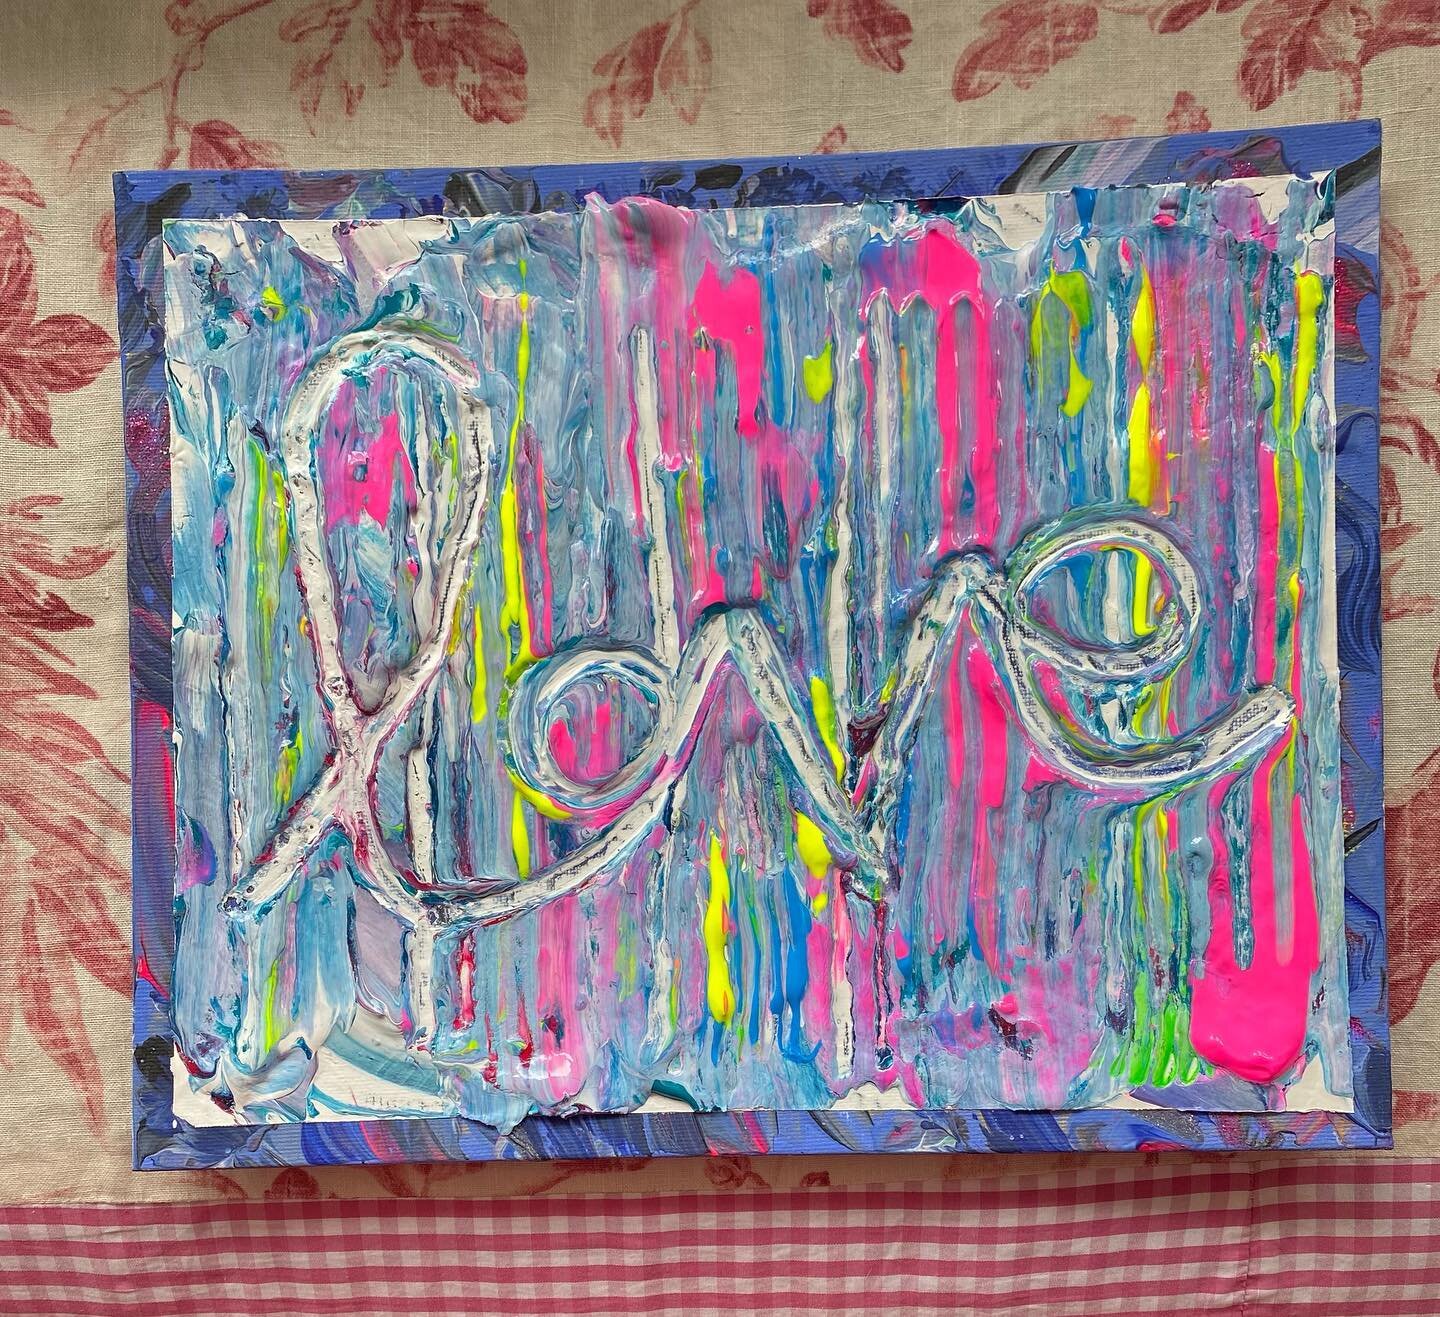 Art - I got my paints out today for the first time in ages today.
.
I&rsquo;ve been playing around with colours, textures, layers and words.
.
I&rsquo;m so pleased to have the energy to channel towards creating again.
.
I was really spurred on by see